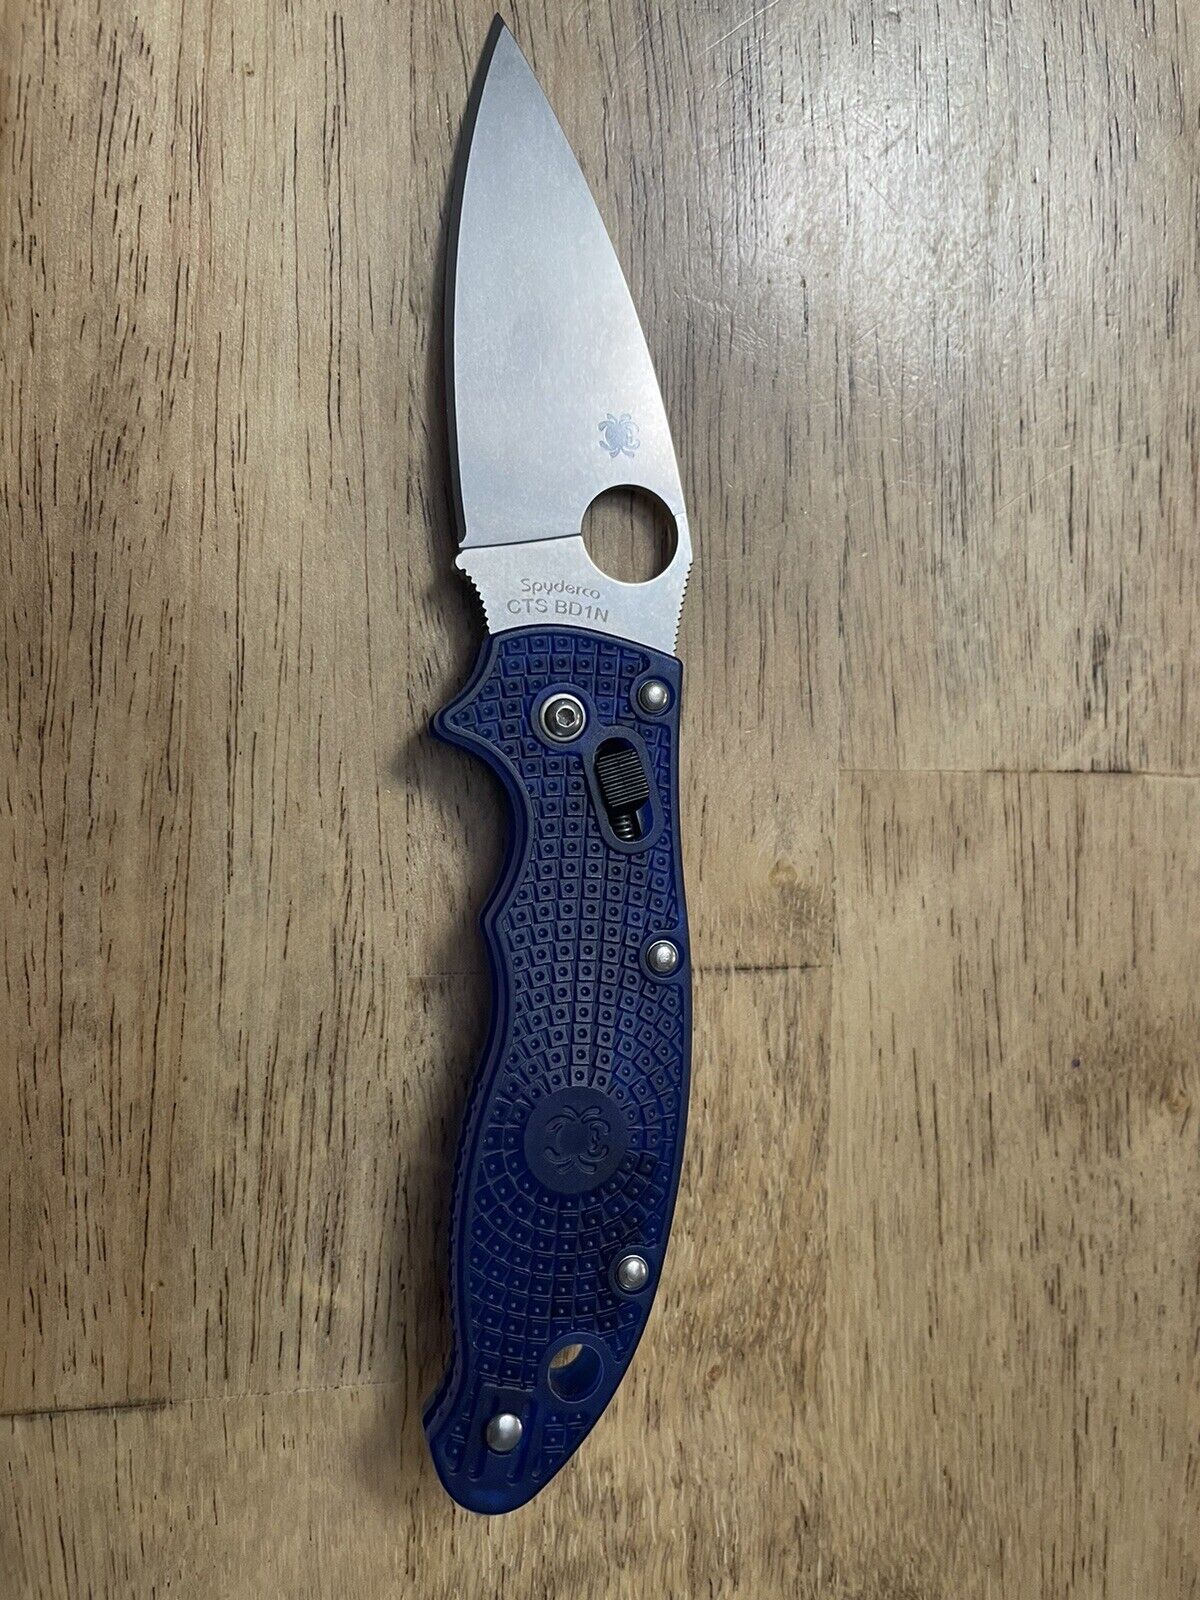 Spyderco Manix 2 Folding Knife - Blue. CTS-BD1N. New Condition.